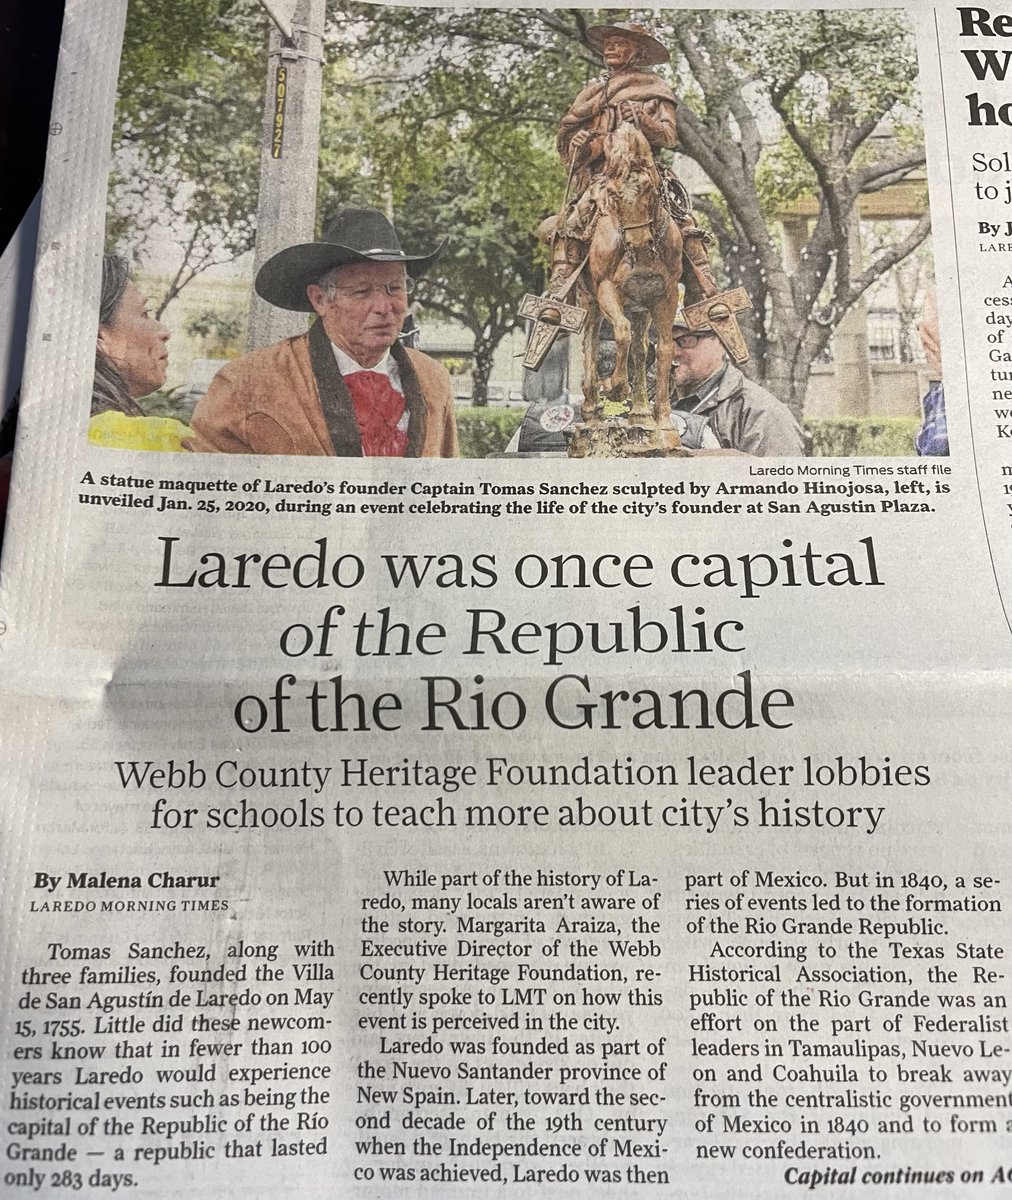 This is published today by the 'Laredo Morning Times'. The Republic of the Rio Grande never existed and my beloved Laredo was not the capital of anything. Lies should not be taught in schools. @lmtnews